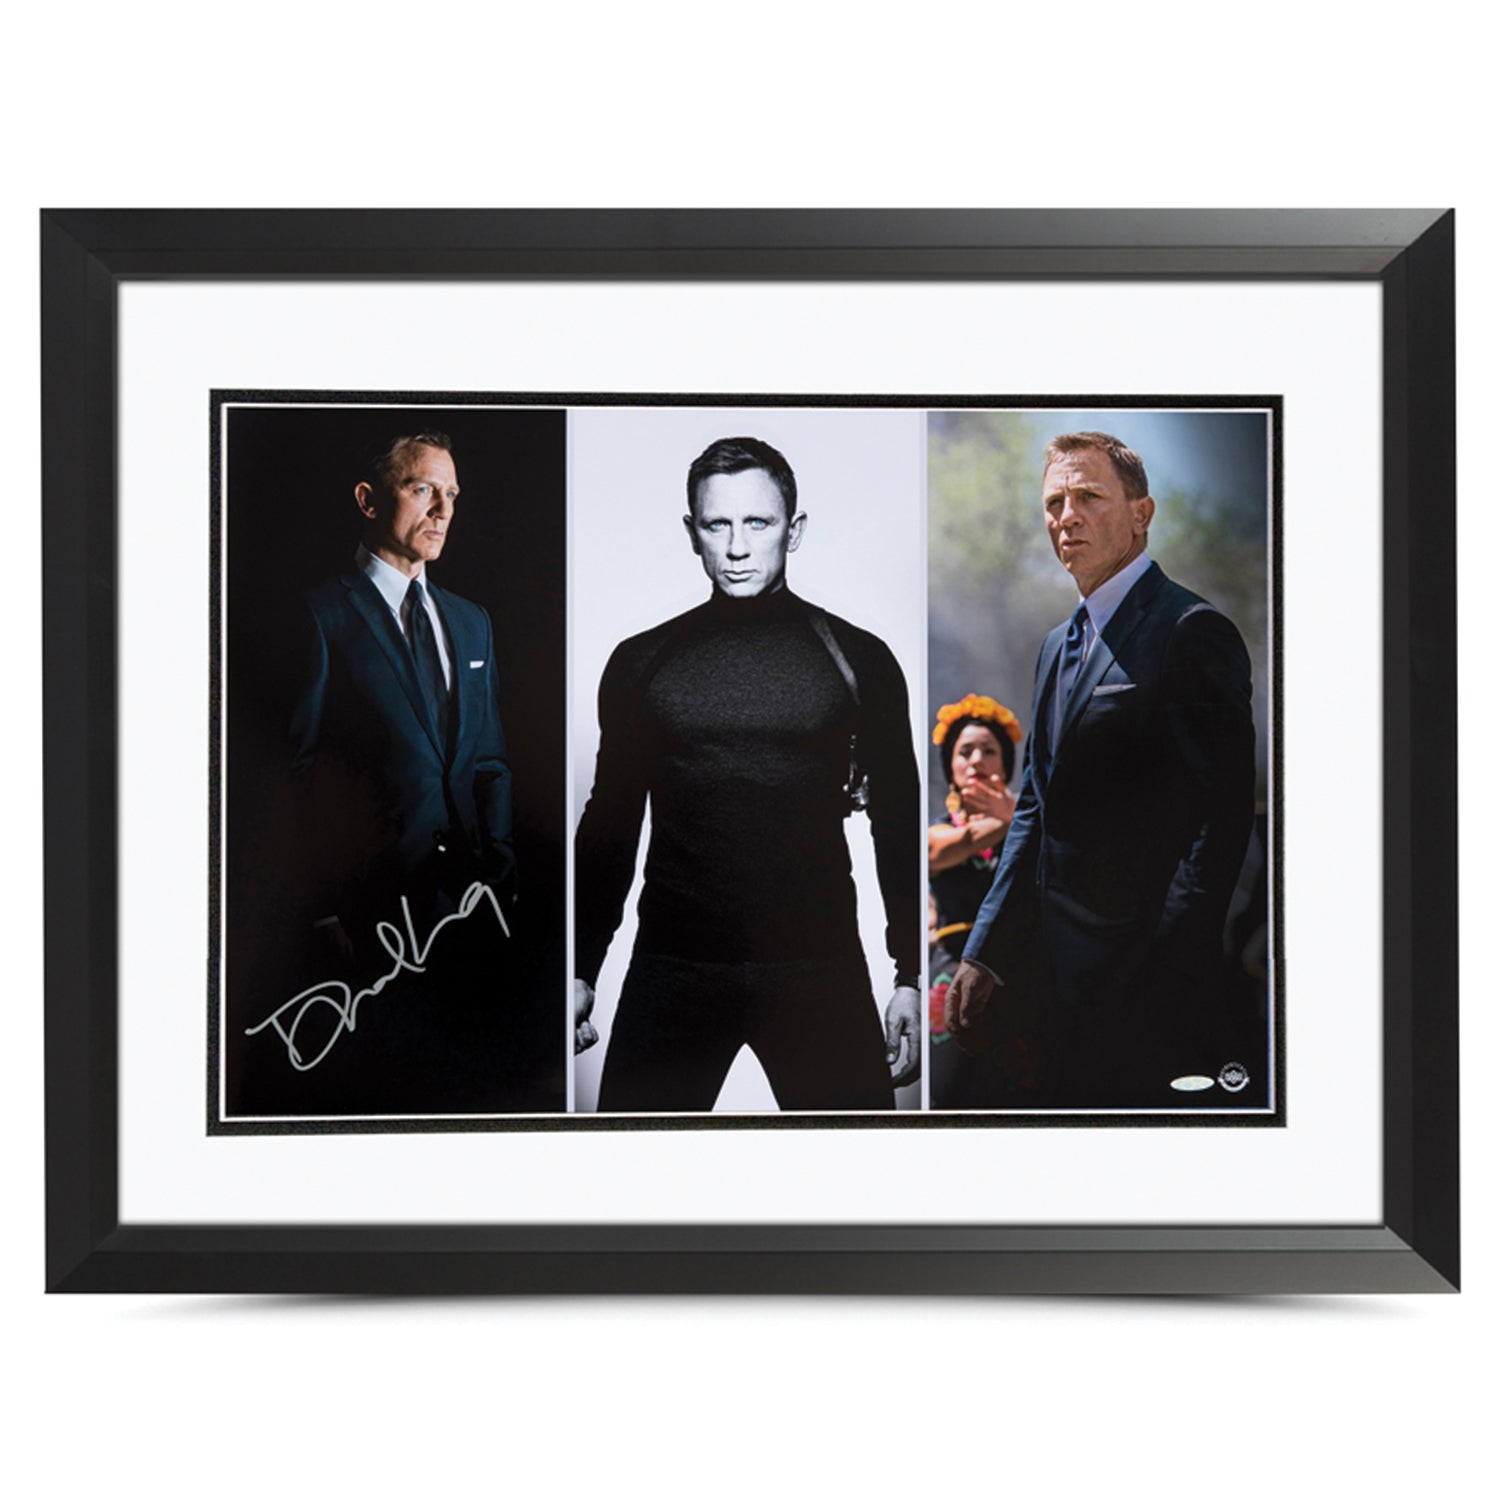  HWC Trading James Bond - Quantum Of Solace Movie Poster Daniel  Craig Signed 16 x 12 inch Framed Gift Printed Autograph Film Print Photo  Picture Display - 16 x 12 Framed